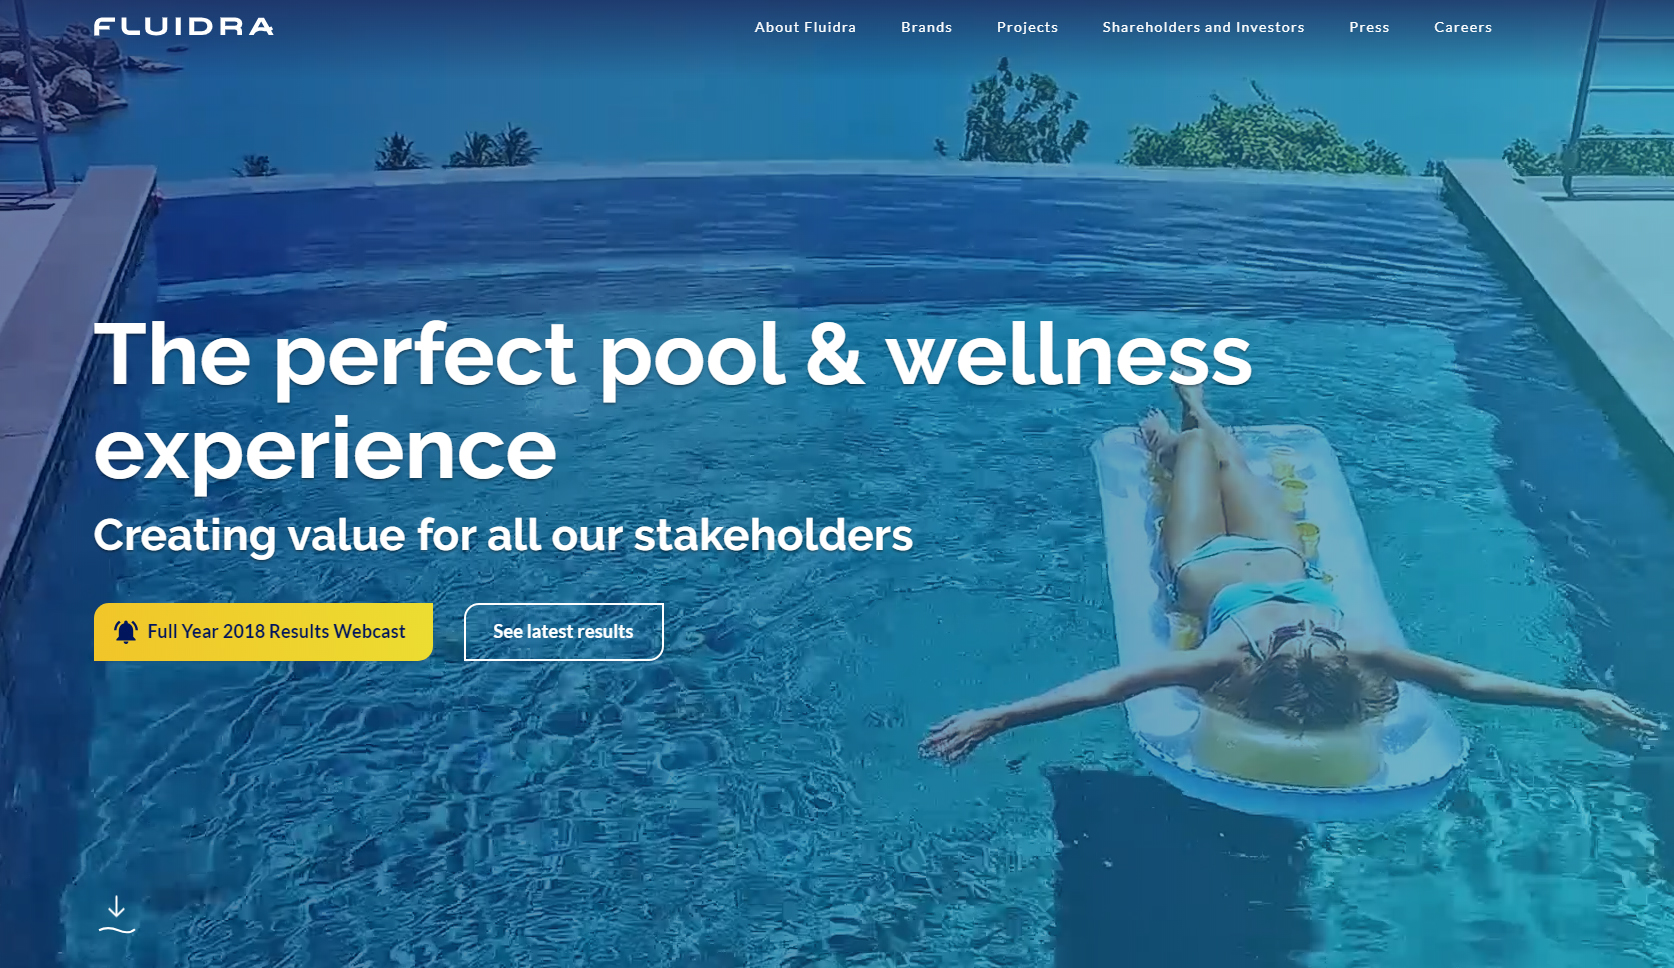 Fluidra launches its new corporate website, reaffirming its leading position in the pool and wellness sector